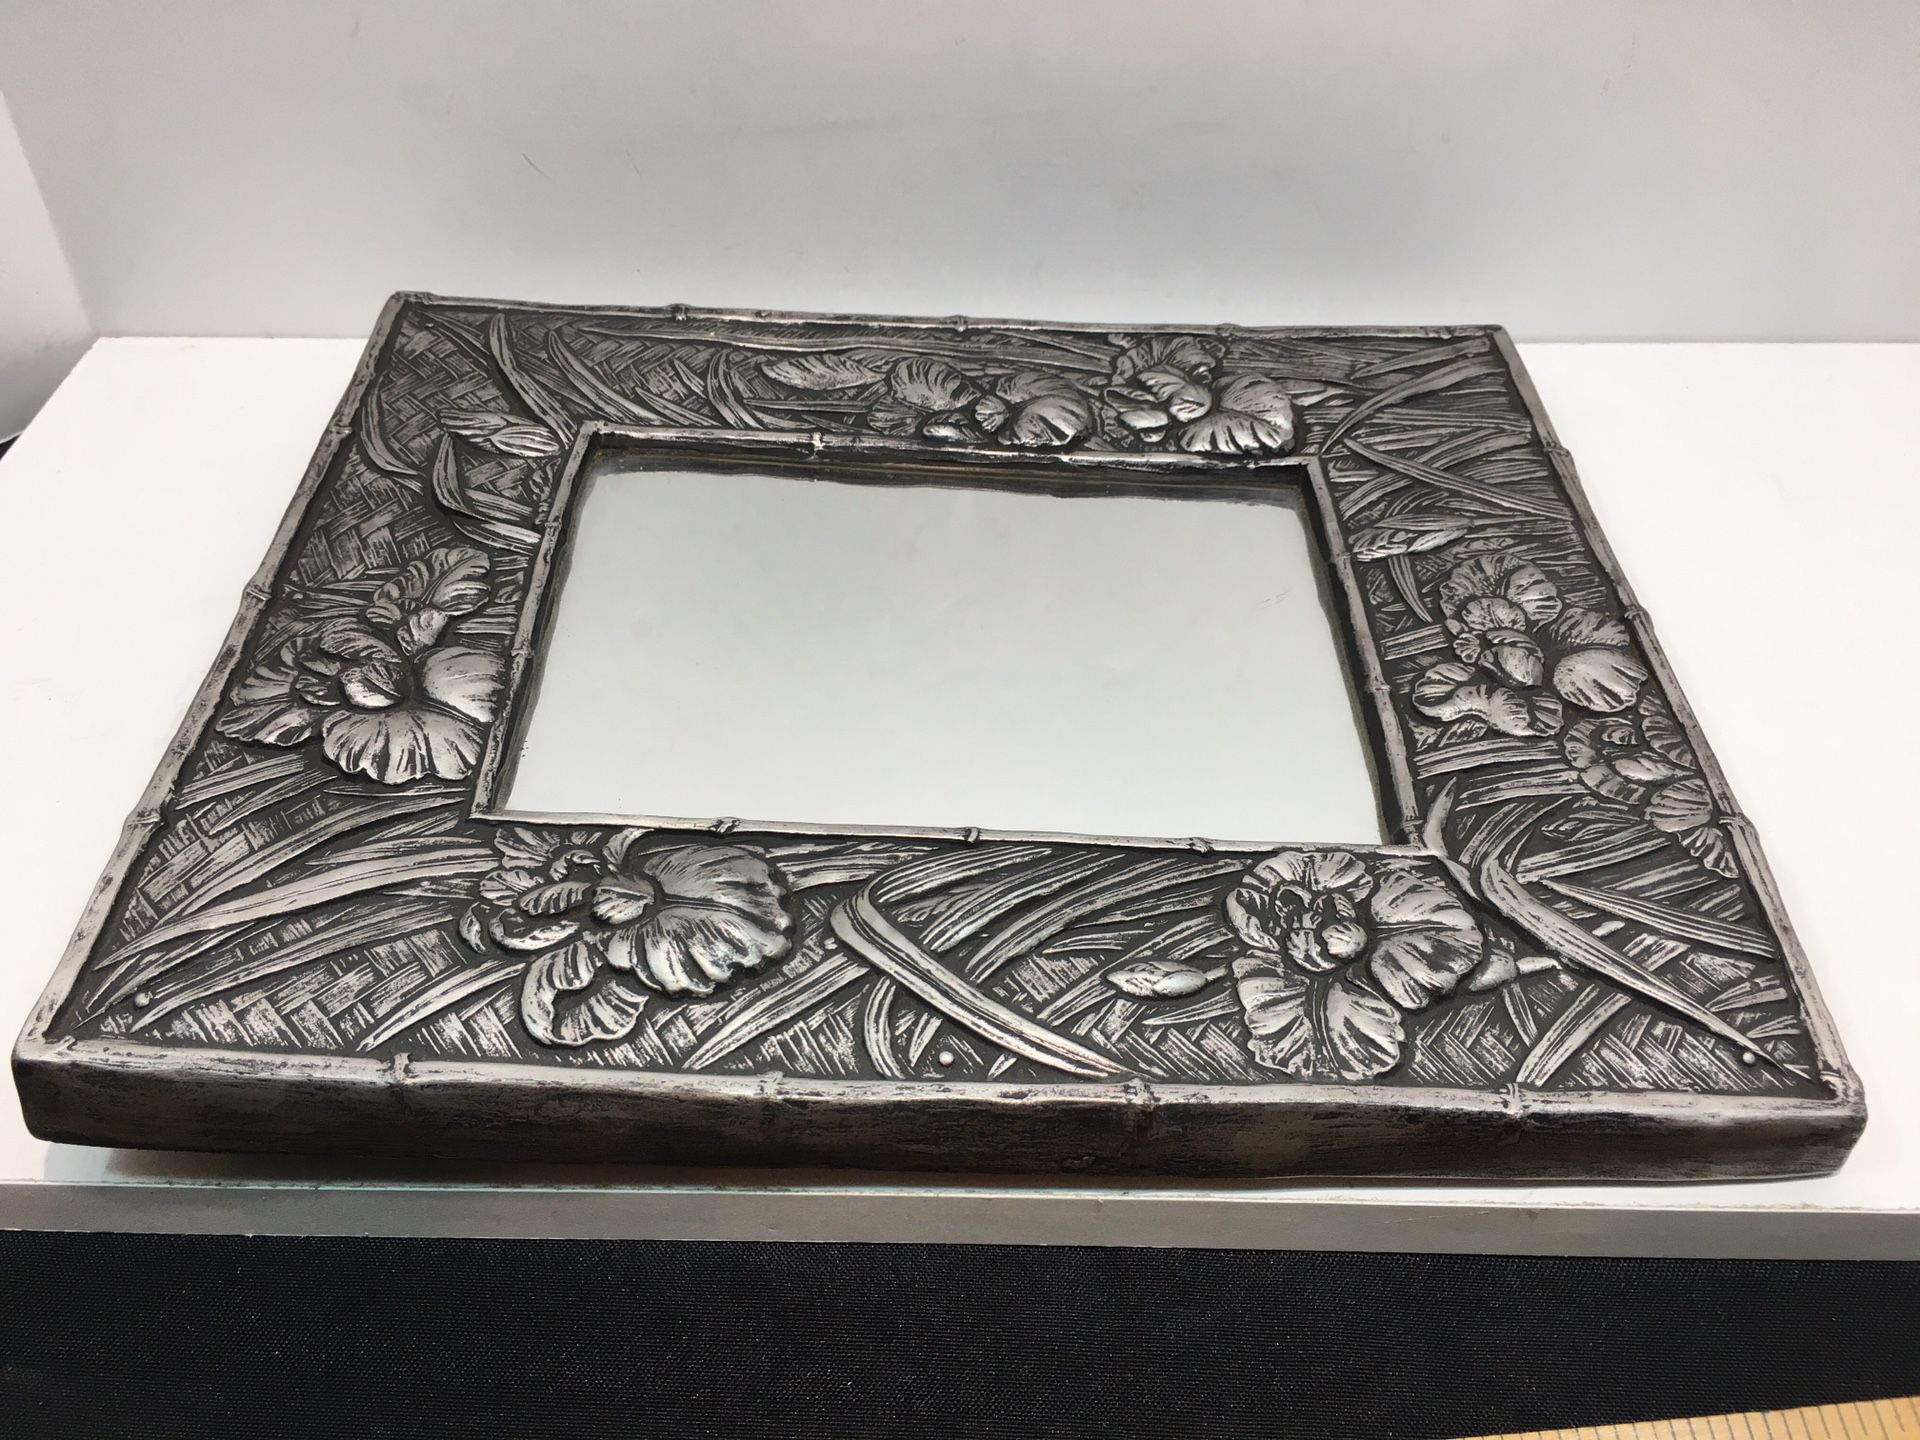 Wall Mounted Mirror with silver frame 10.5” x 12.5”. / Excellent Shape